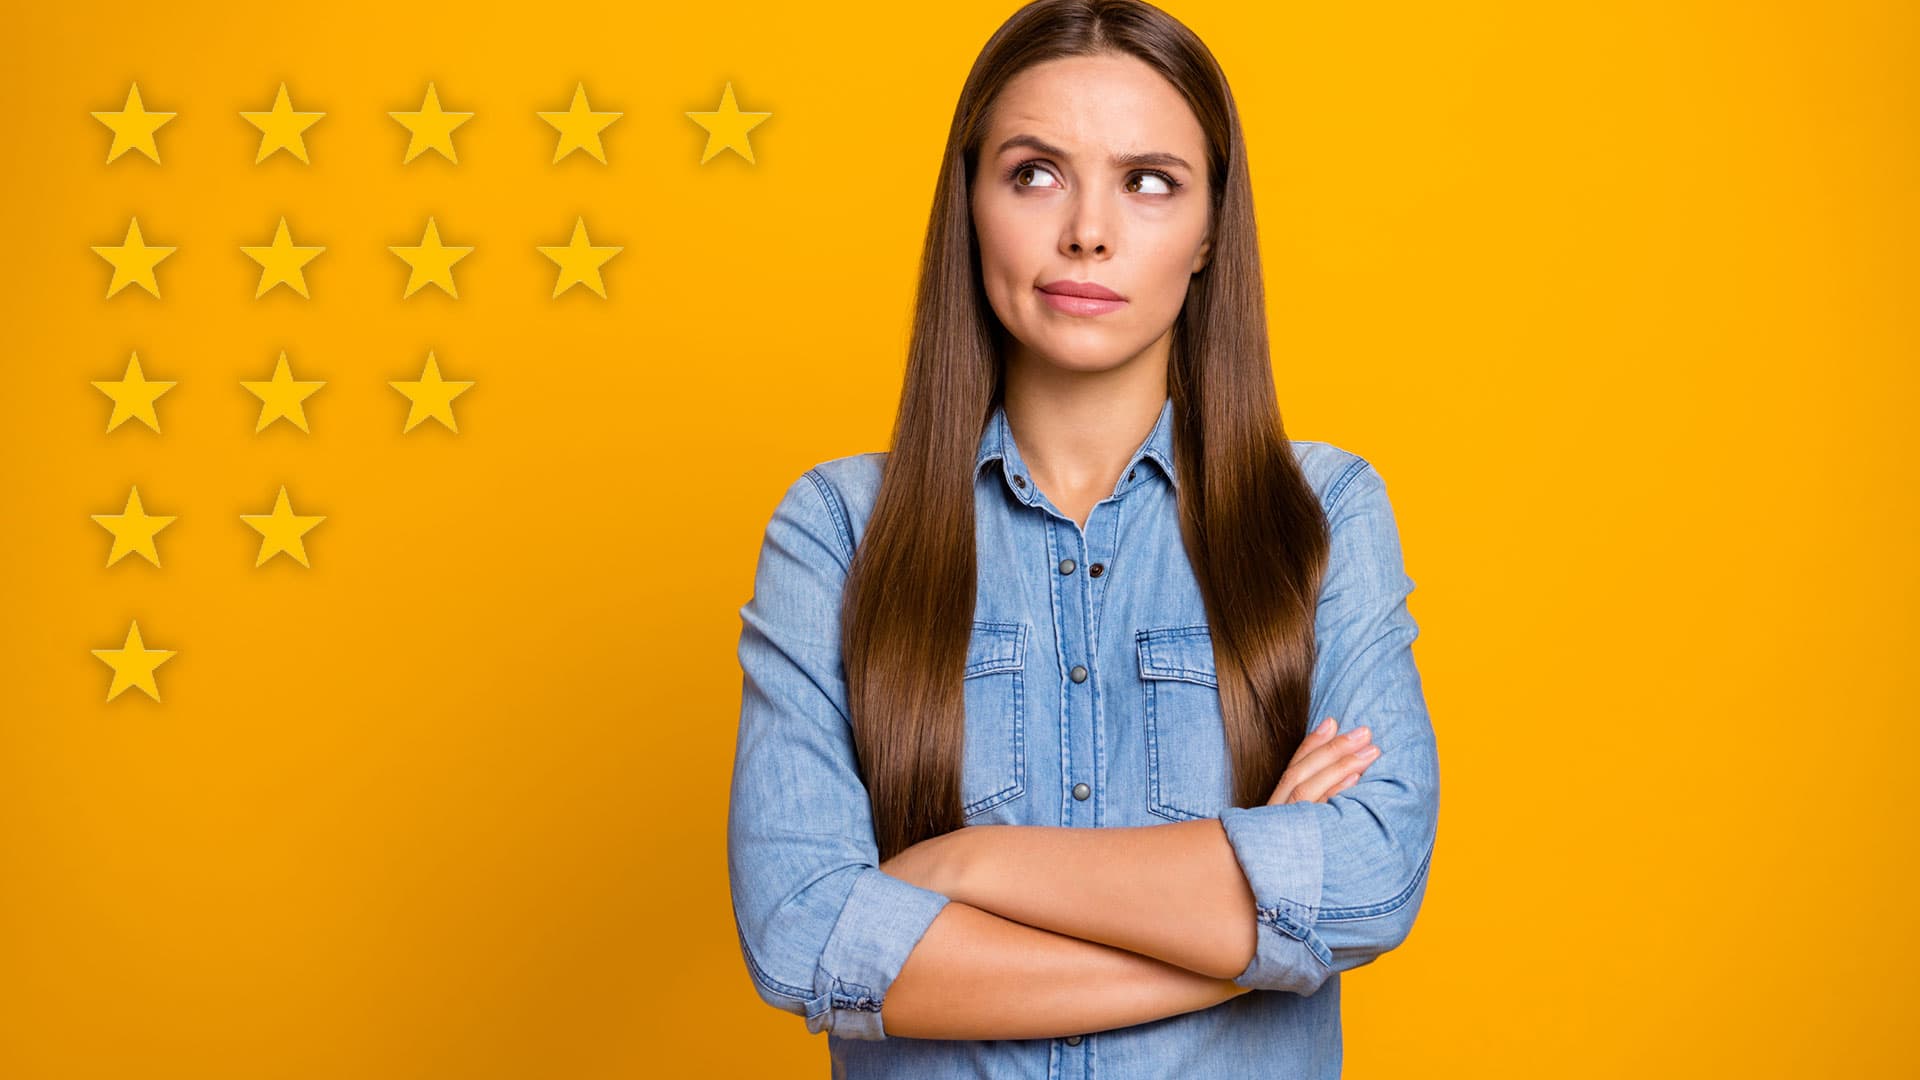 Woman unsure about what hotel to pick, staring at multiple stars as options